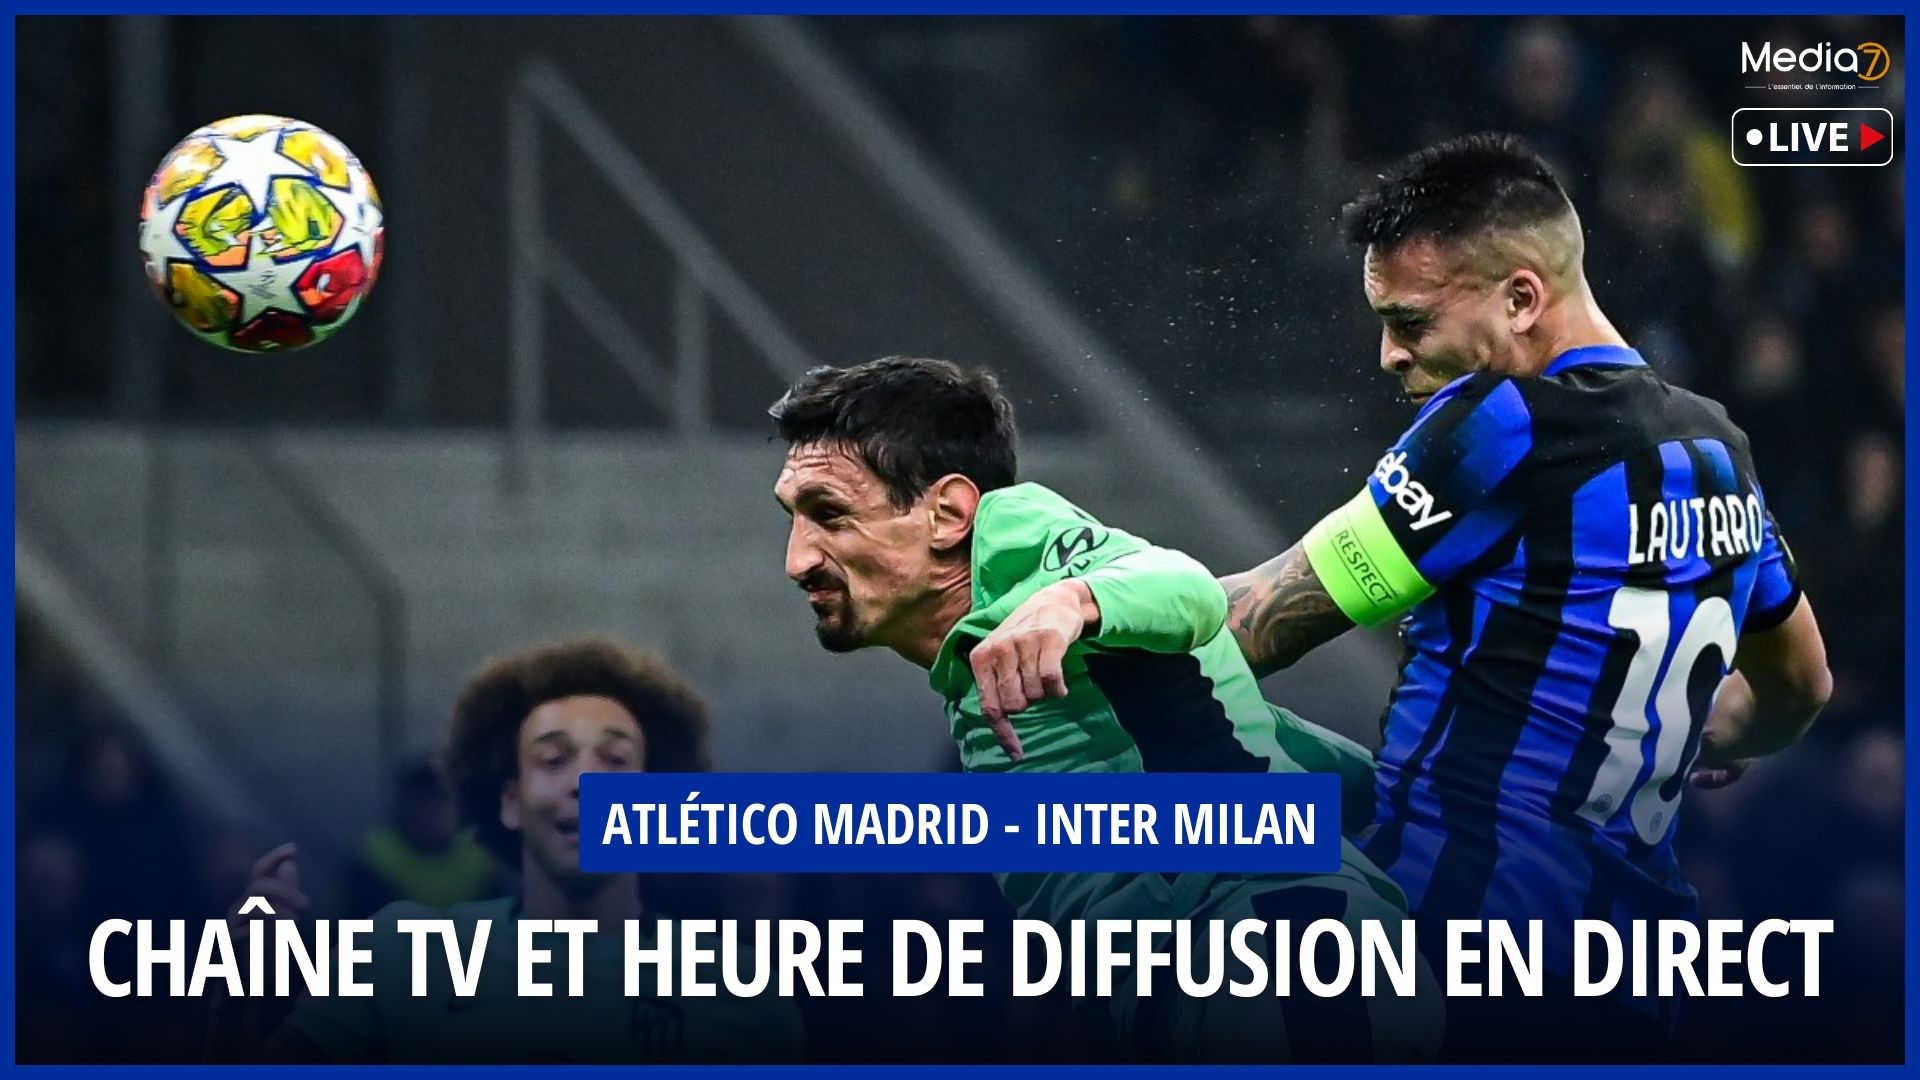 Watch the Atlético Madrid - Inter Milan Match Live: Time, TV Channel & Streaming - Media7